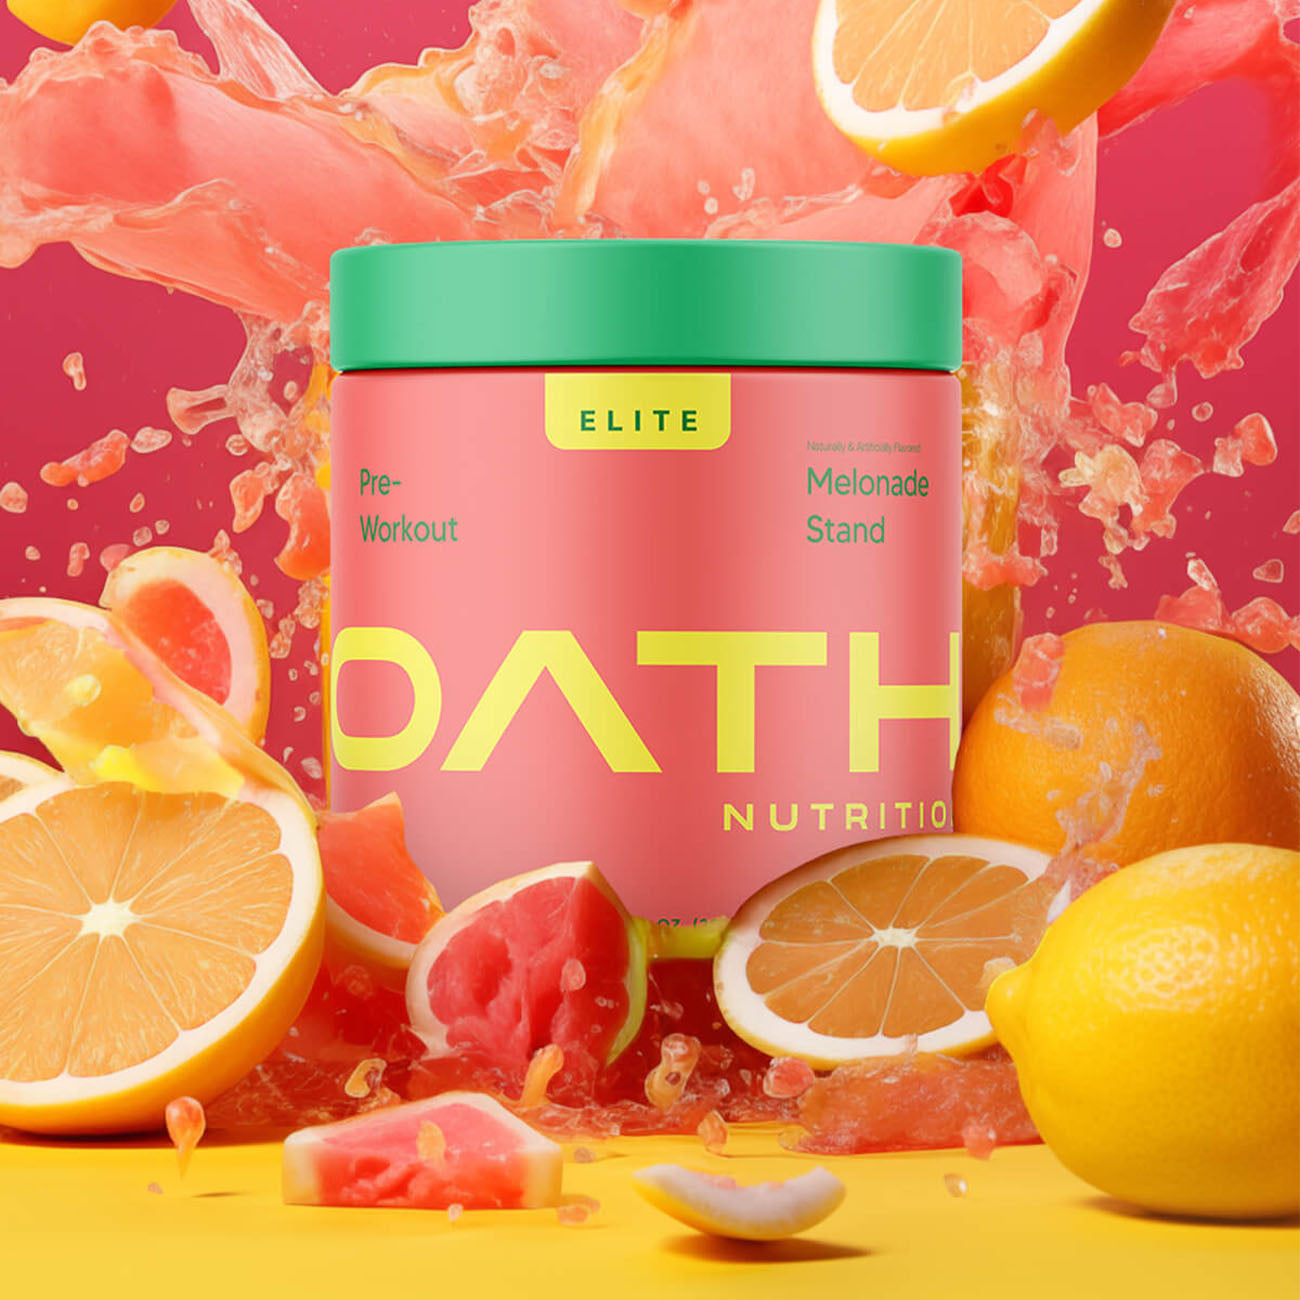 Oath Elite Pre-Workout - Melonade Stand container with lemons bursting all around it